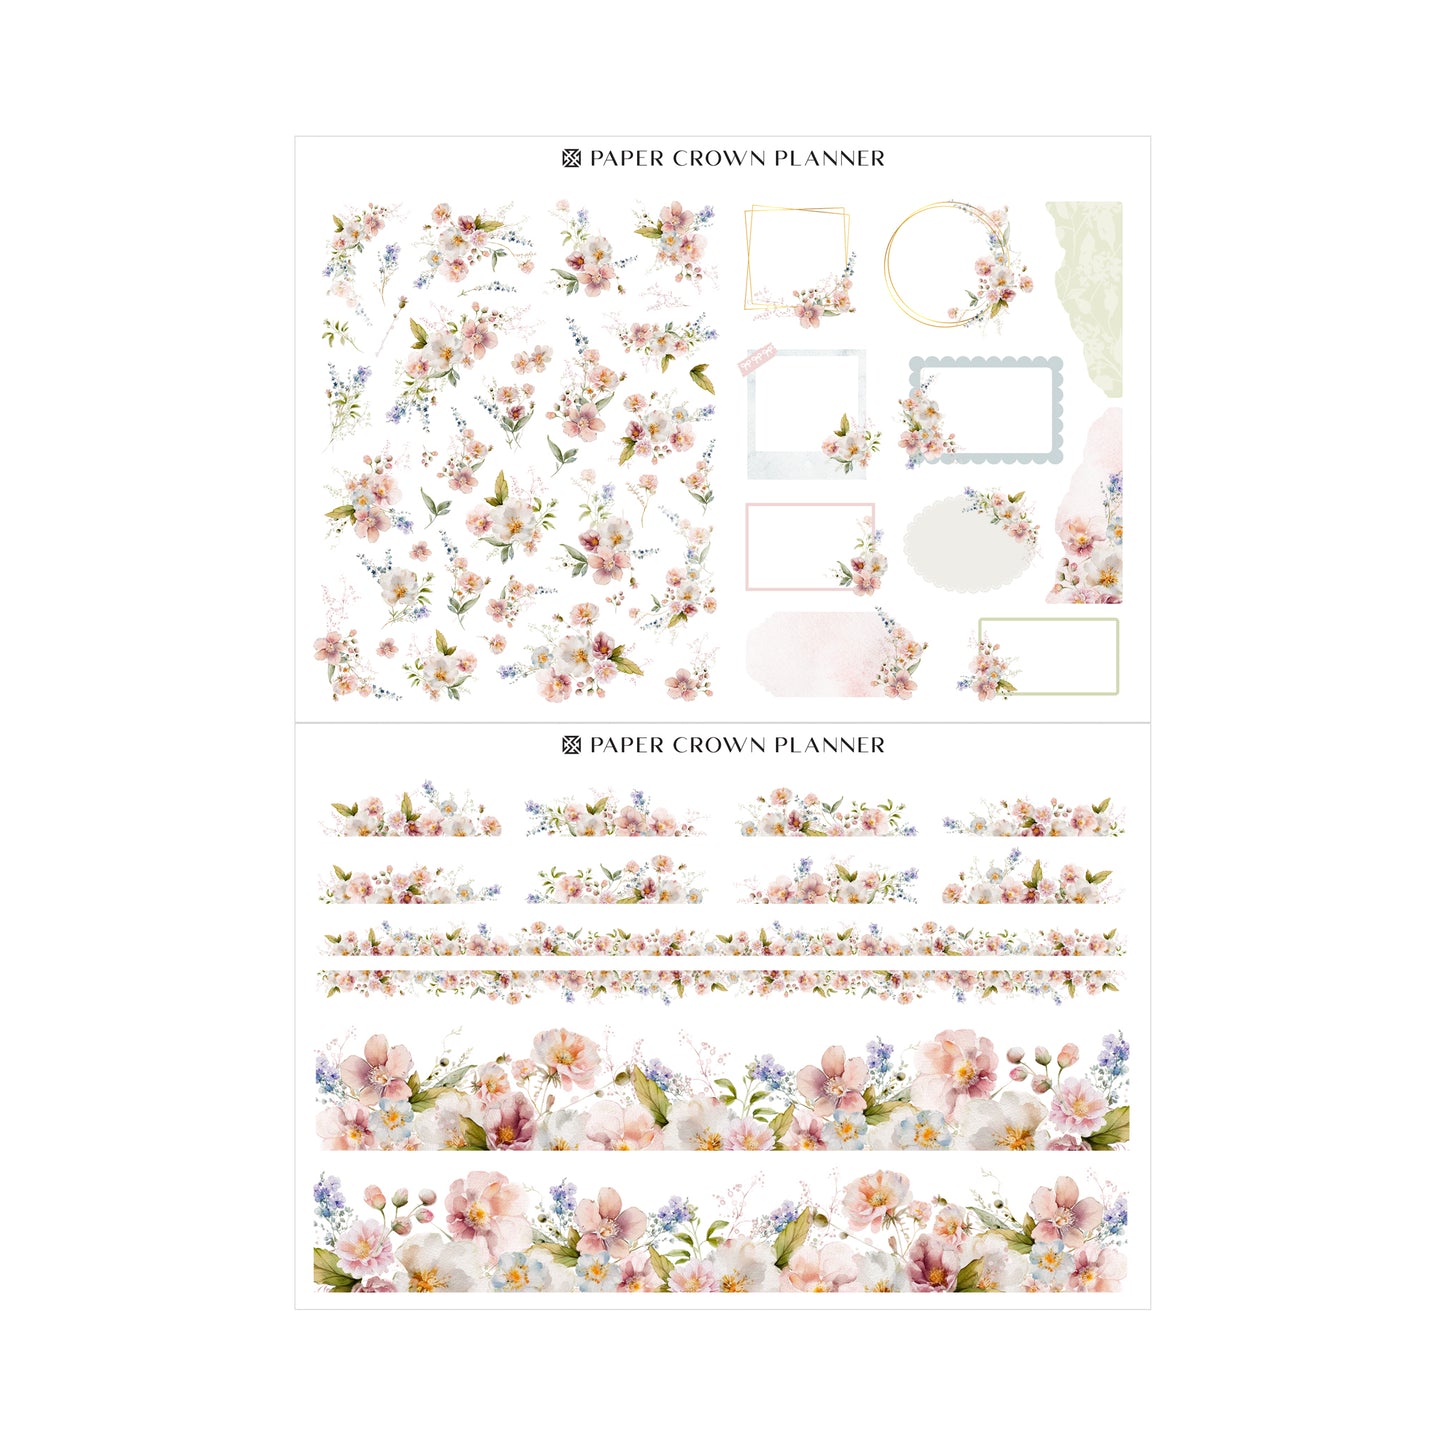 WHIMSICAL GARDEN ADD-ON // Floral Deco